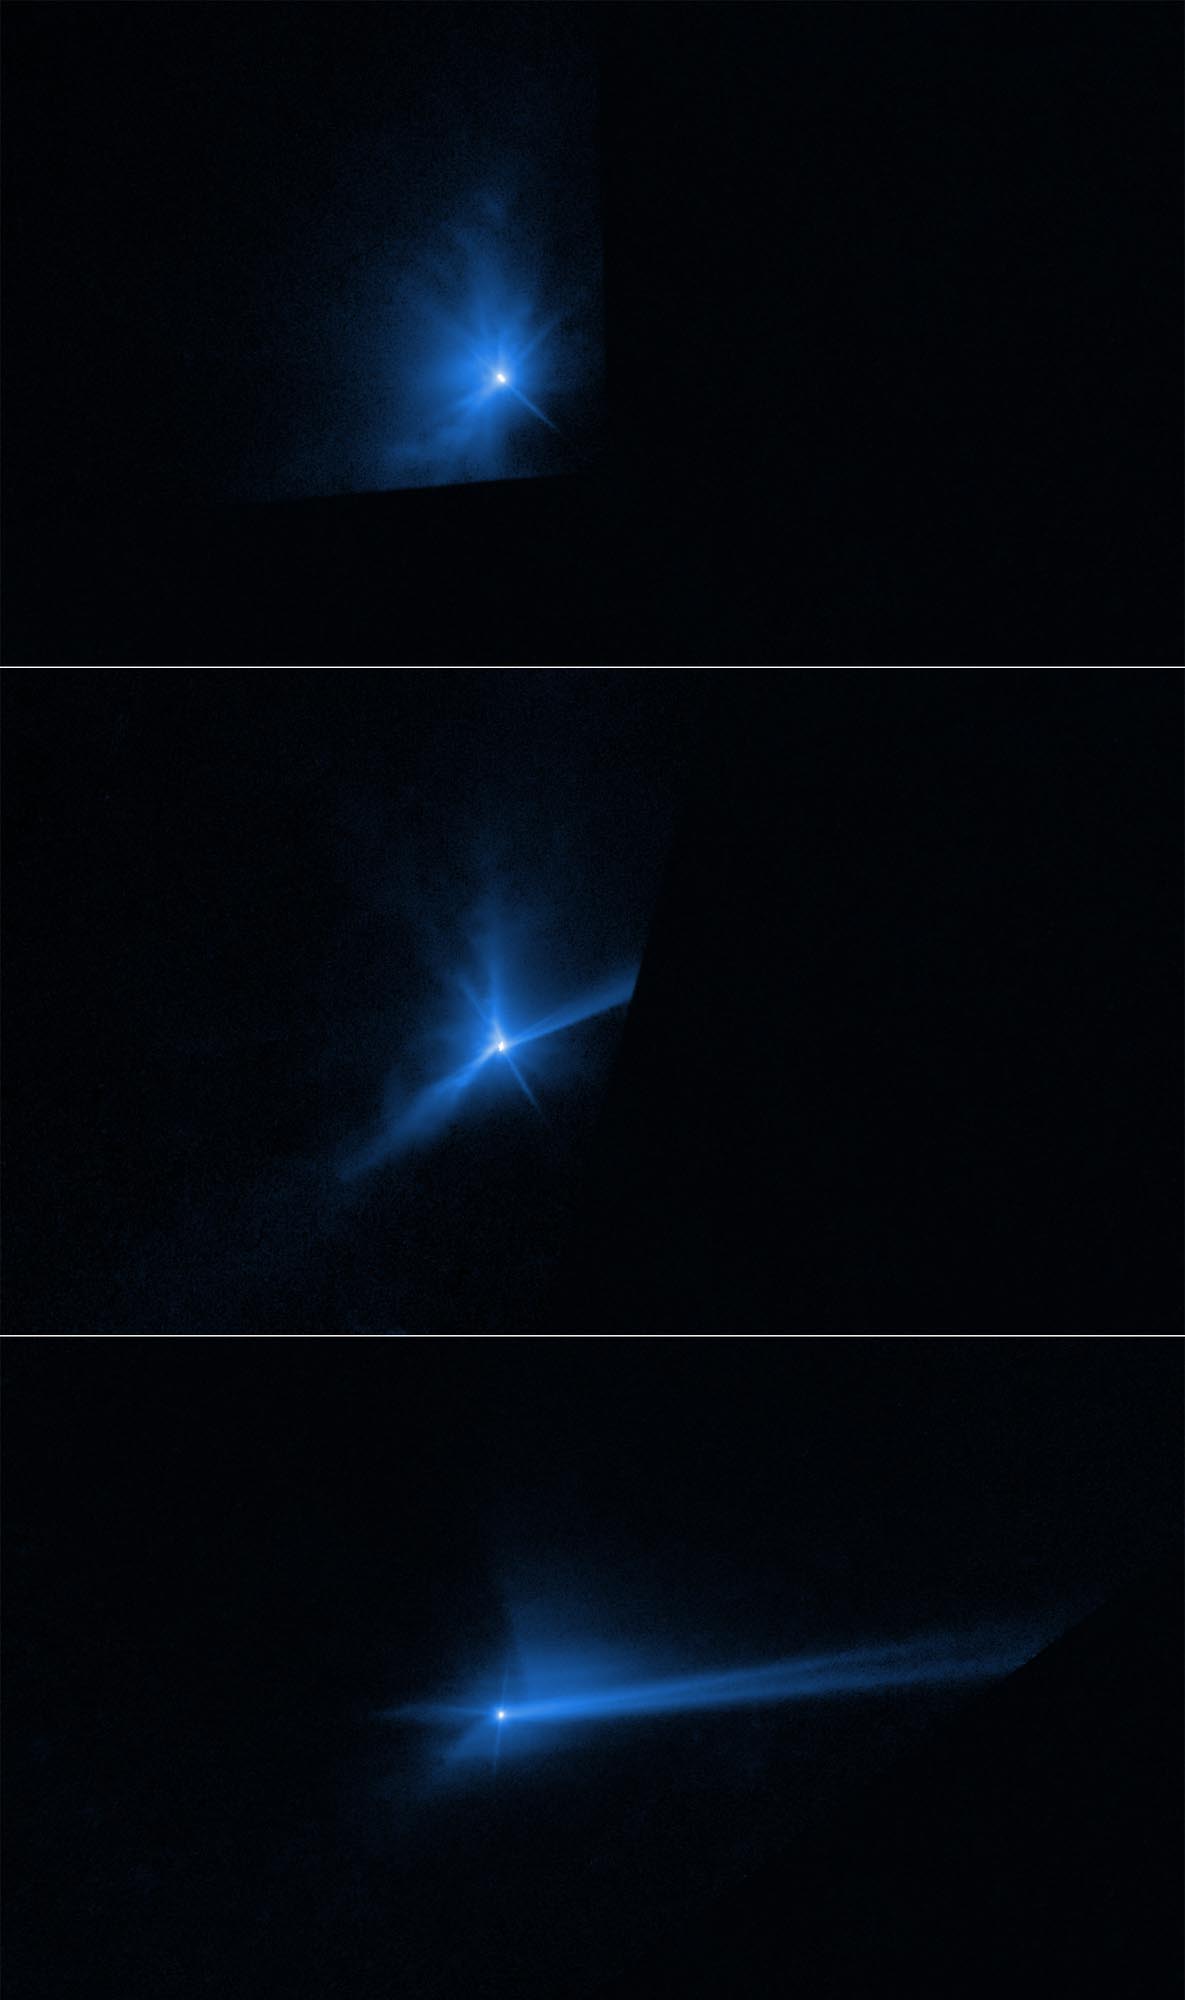 Didymos-Dimorphos System: three images stacked vertically. Each shows a bright white spot surrounded by an irregular blue cloud. Background is black. Labels and cloud shape differ in each image.Top: September 27; 01:06:21; T+1.9 hours. Blue cloud has more material toward the upper left of the spot and less toward the lower right. Dashed white line labeled “ejecta cone” touches the left edge of the spot and forms an arc facing toward the upper left.Middle: September 28; 17:06:51; T+1.7 days. Cloud has a more triangular shape with more material to the lower left and upper right of the spot. Dashed white line labeled “curved ejecta stream” passes through the spot, with the top portion curving upward and the bottom extending down toward the lower left. Bottom: October 8; 19:62:10; T+11.9 days. Cloud is brighter toward the upper right side of the spot, with a long triangle extending toward the right. Two dash lines following the edges of the triangle are labeled “double tail formation.